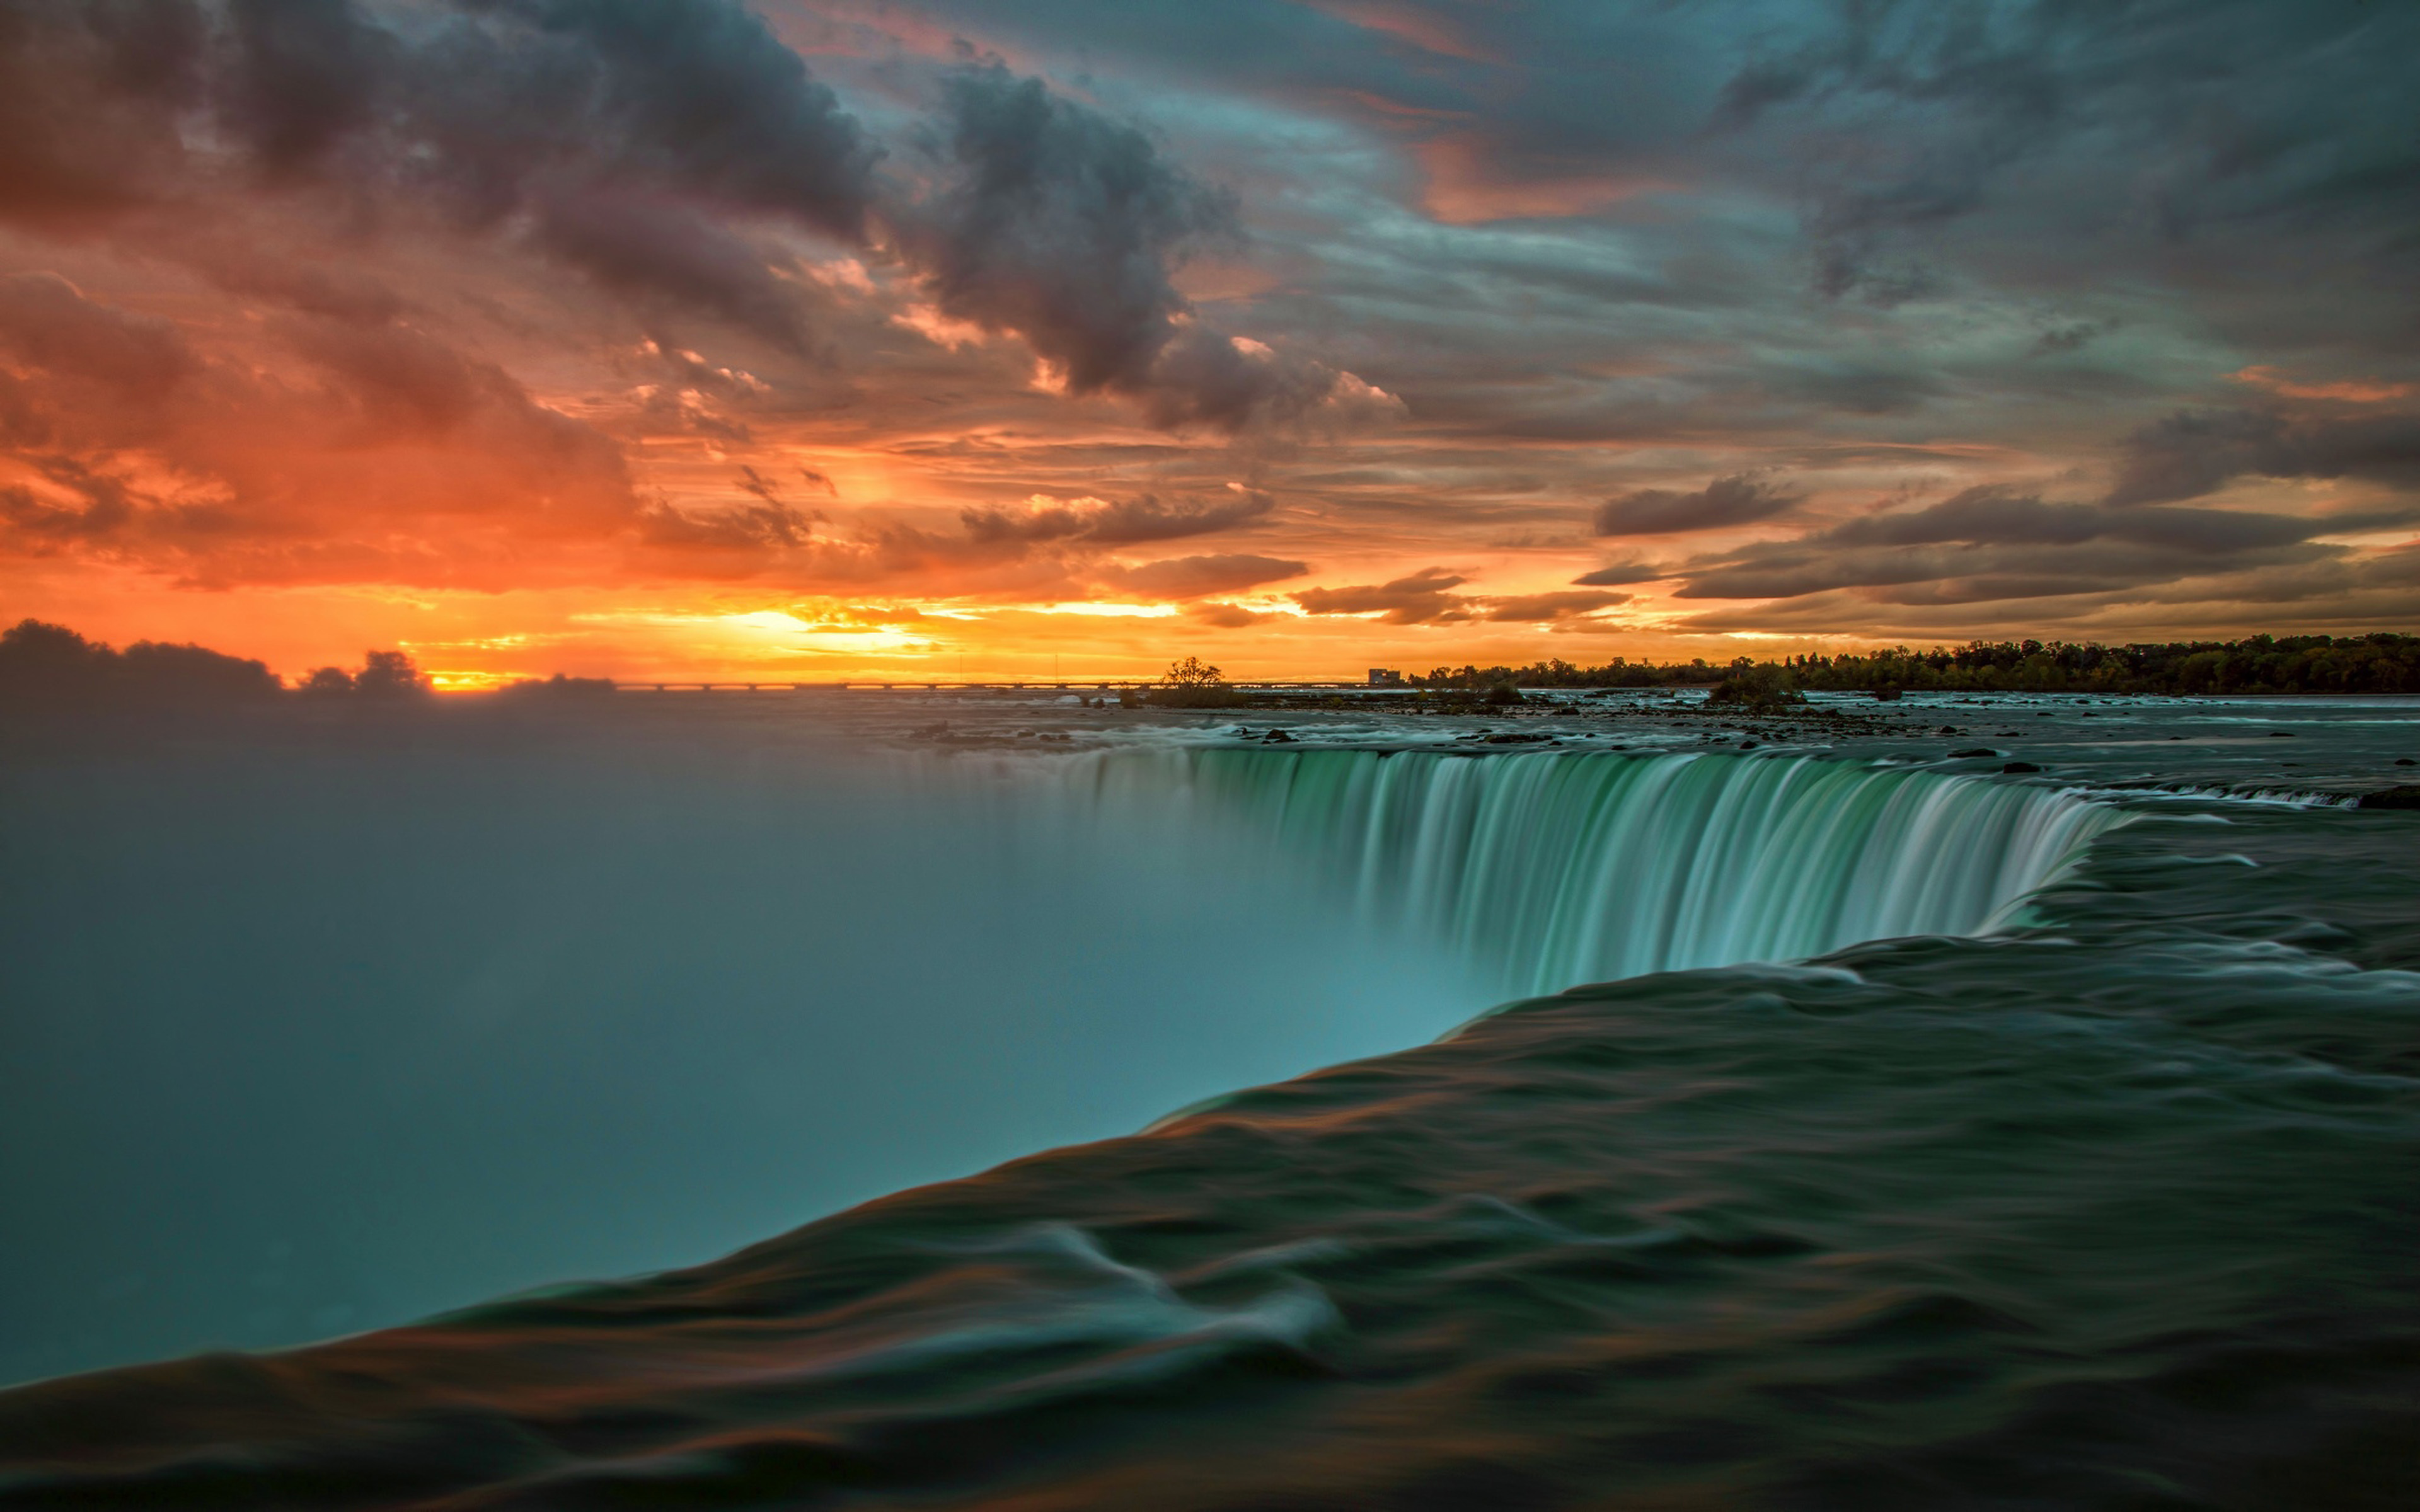 Niagara Falls In Canada Sunset Landscape Nature 4k Ultra Hd Desktop  Wallpapers For Computers Laptop Tablet And Mobile Phones 3840x2400 :  